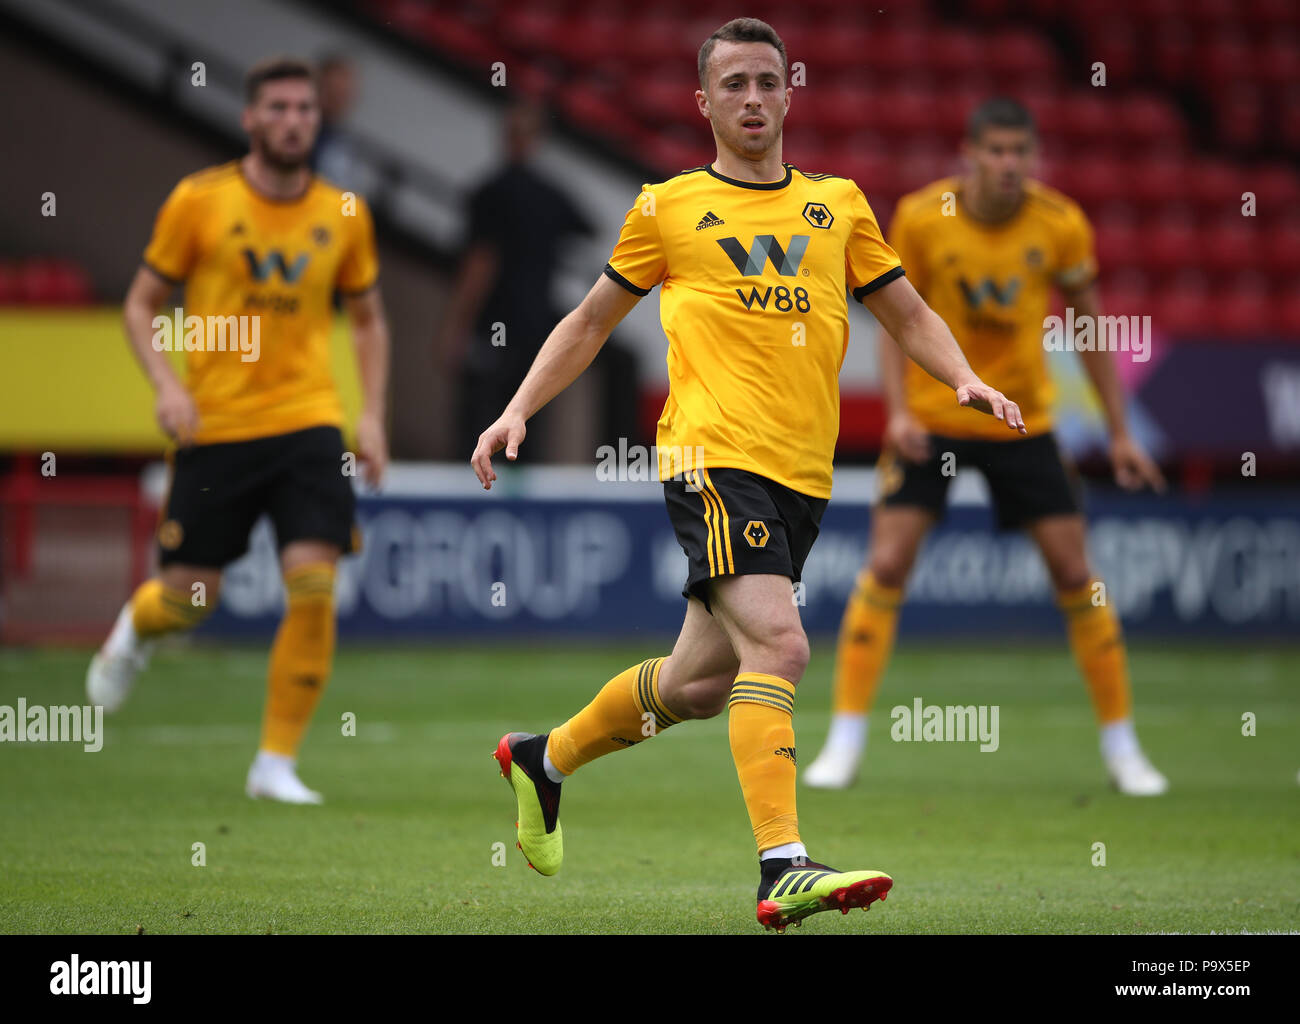 Wolverhampton Wanderers' Diogo Jota during a pre season friendly match at the Banks's Stadium, Walsall. PRESS ASSOCIATION Photo. Picture date: Thursday July 19, 2018. Photo credit should read: Nick Potts/PA Wire. EDITORIAL USE ONLY No use with unauthorised audio, video, data, fixture lists, club/league logos or 'live' services. Online in-match use limited to 75 images, no video emulation. No use in betting, games or single club/league/player publications. Stock Photo